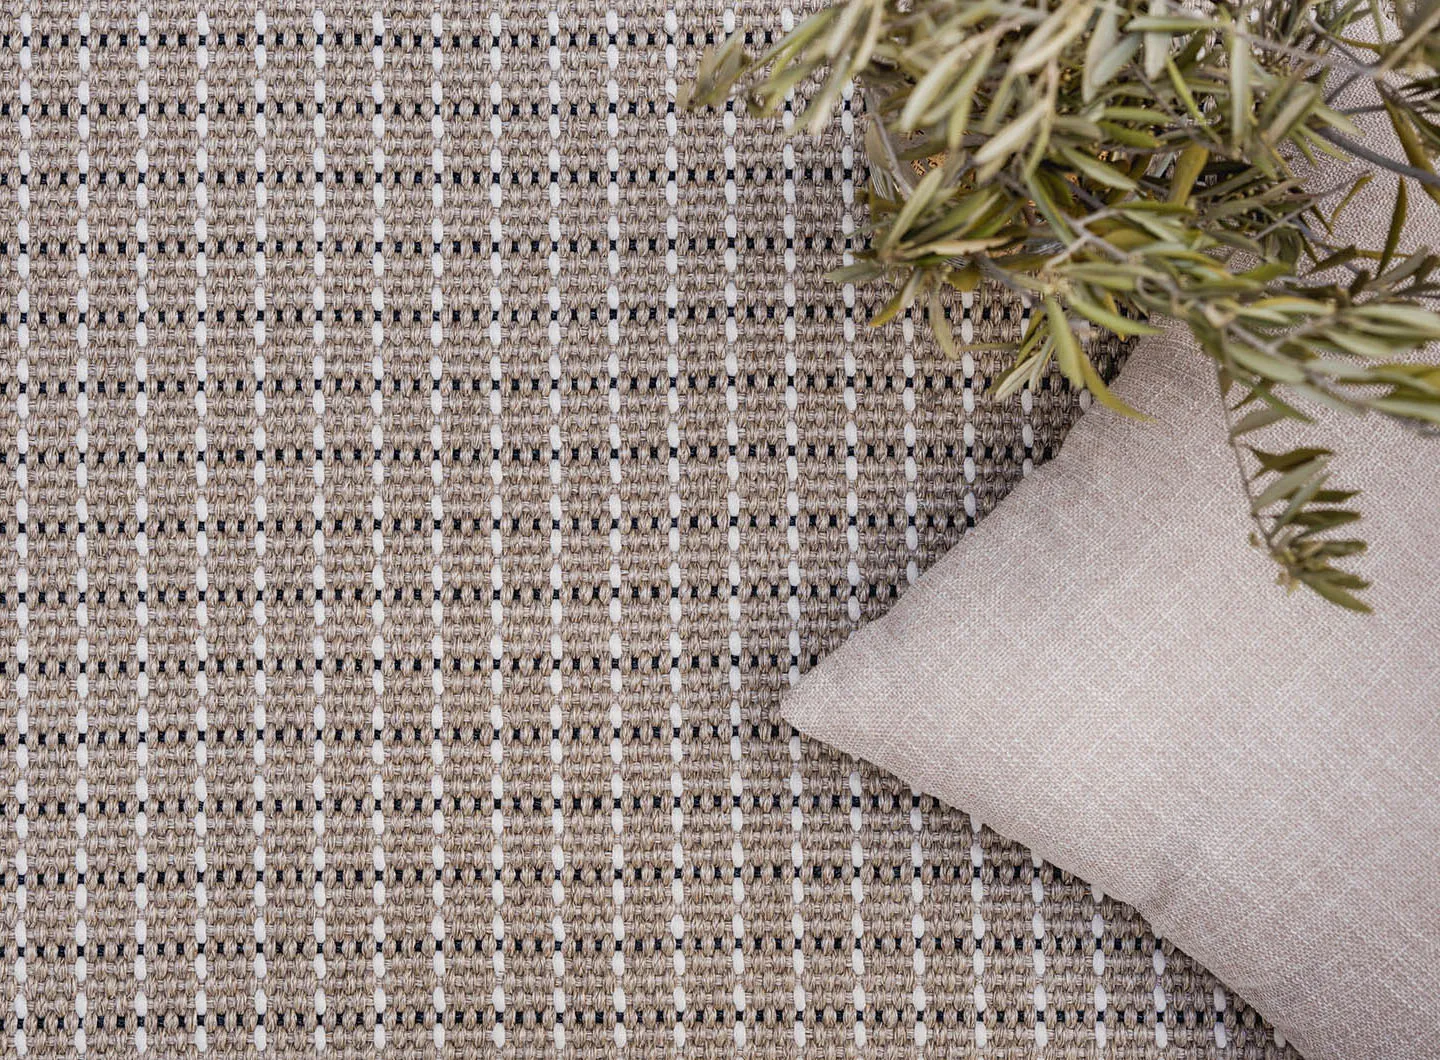 Rols Carpets - Terra (outdoor, rugs, rug, carpets, Tappeti, moquette, recycled, PET, plastic, sinthetic)) 